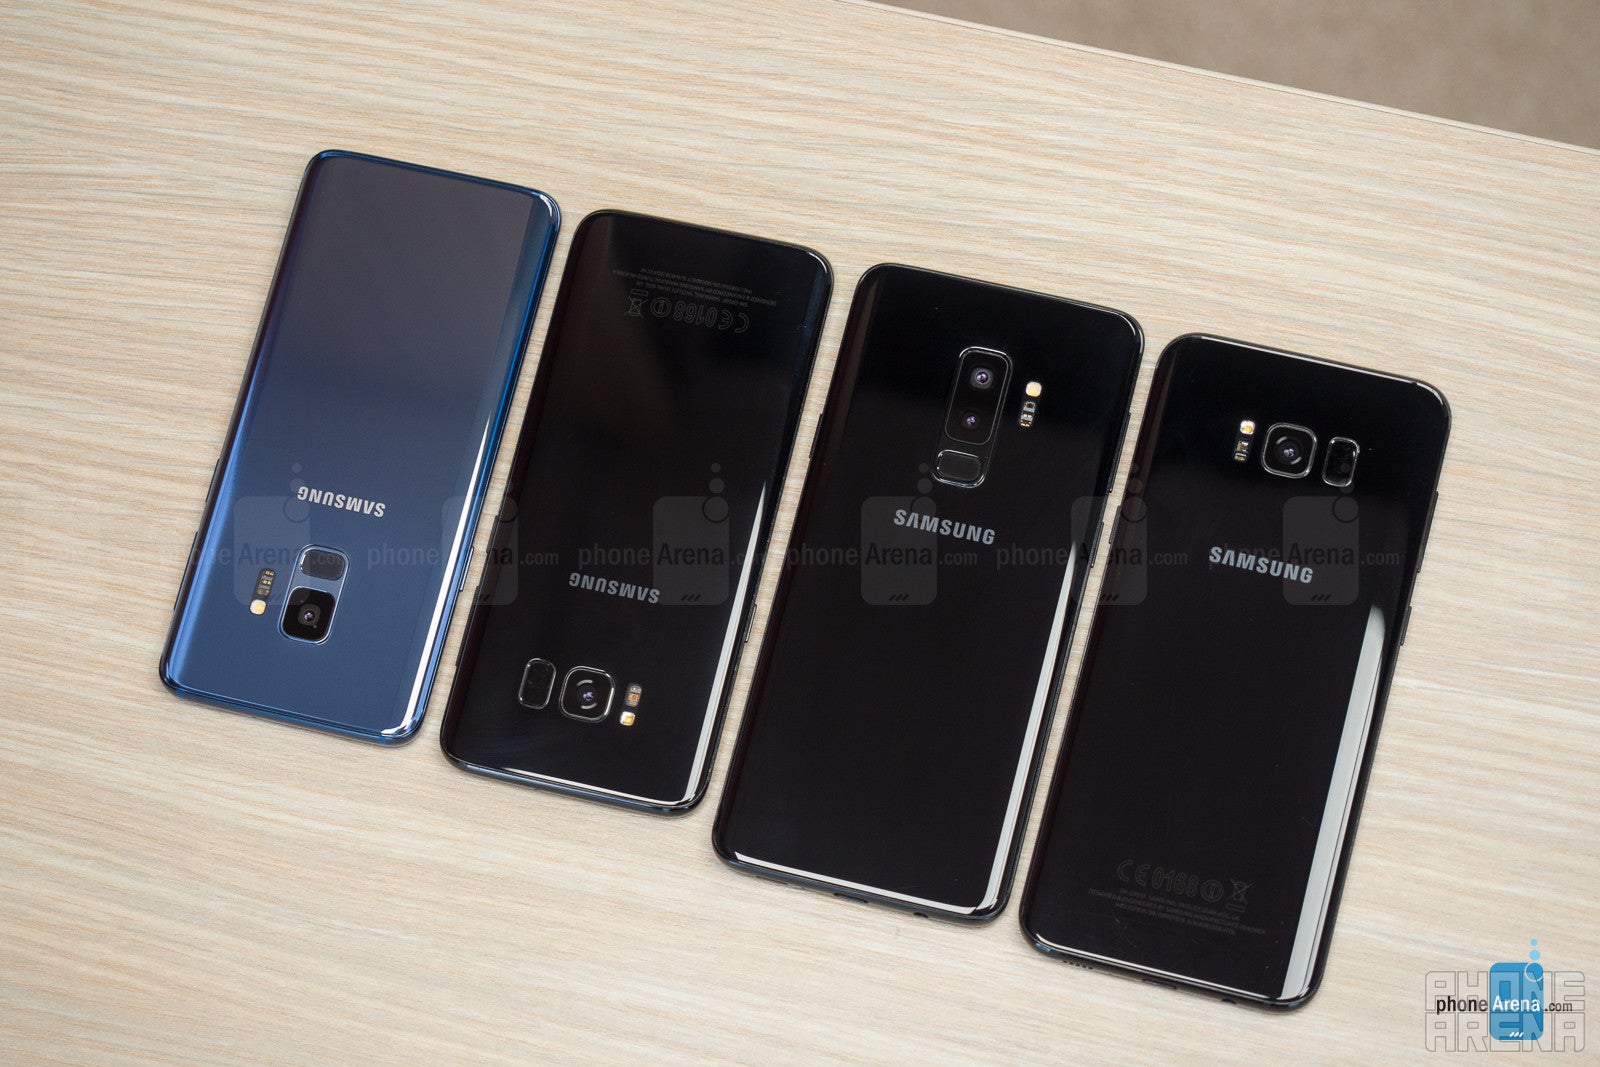 Left to right - the Samsung Galaxy S9, Galaxy S8, Galaxy S9+, and Galaxy S8+ - Samsung Galaxy S9 and S9+ vs Galaxy S8 and S8+